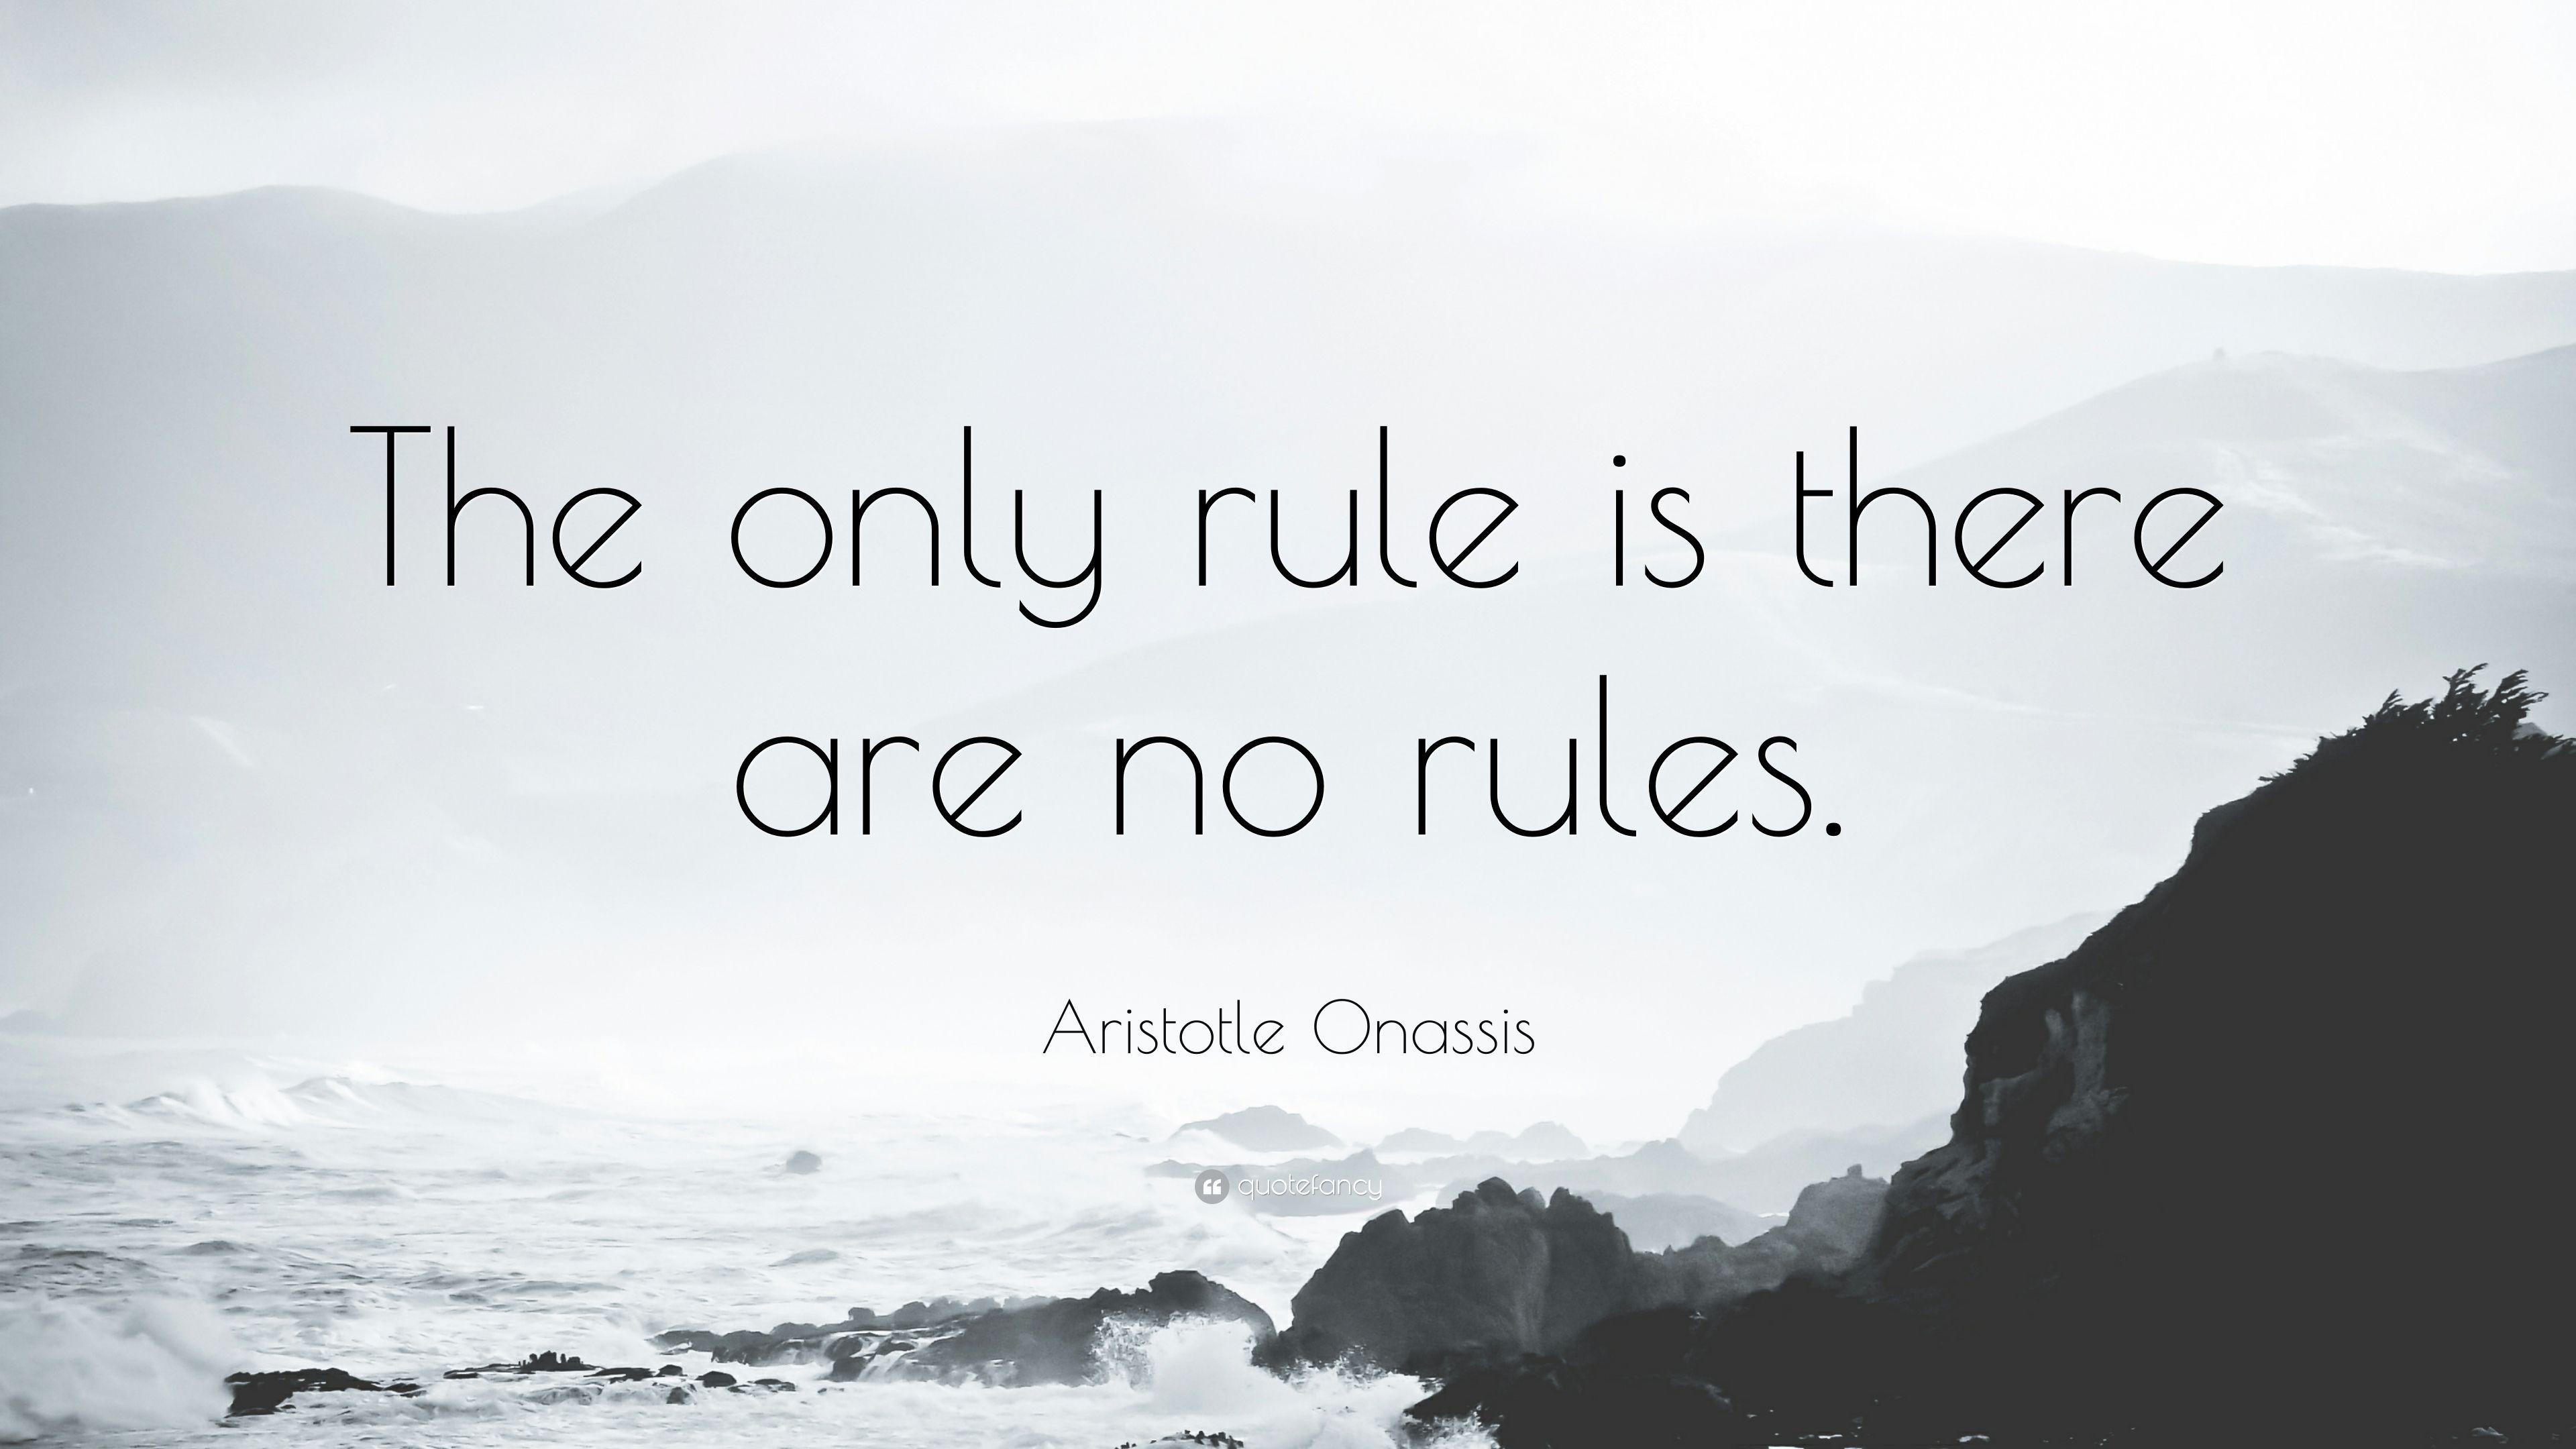 Aristotle Onassis Quote: “The only rule is there are no rules